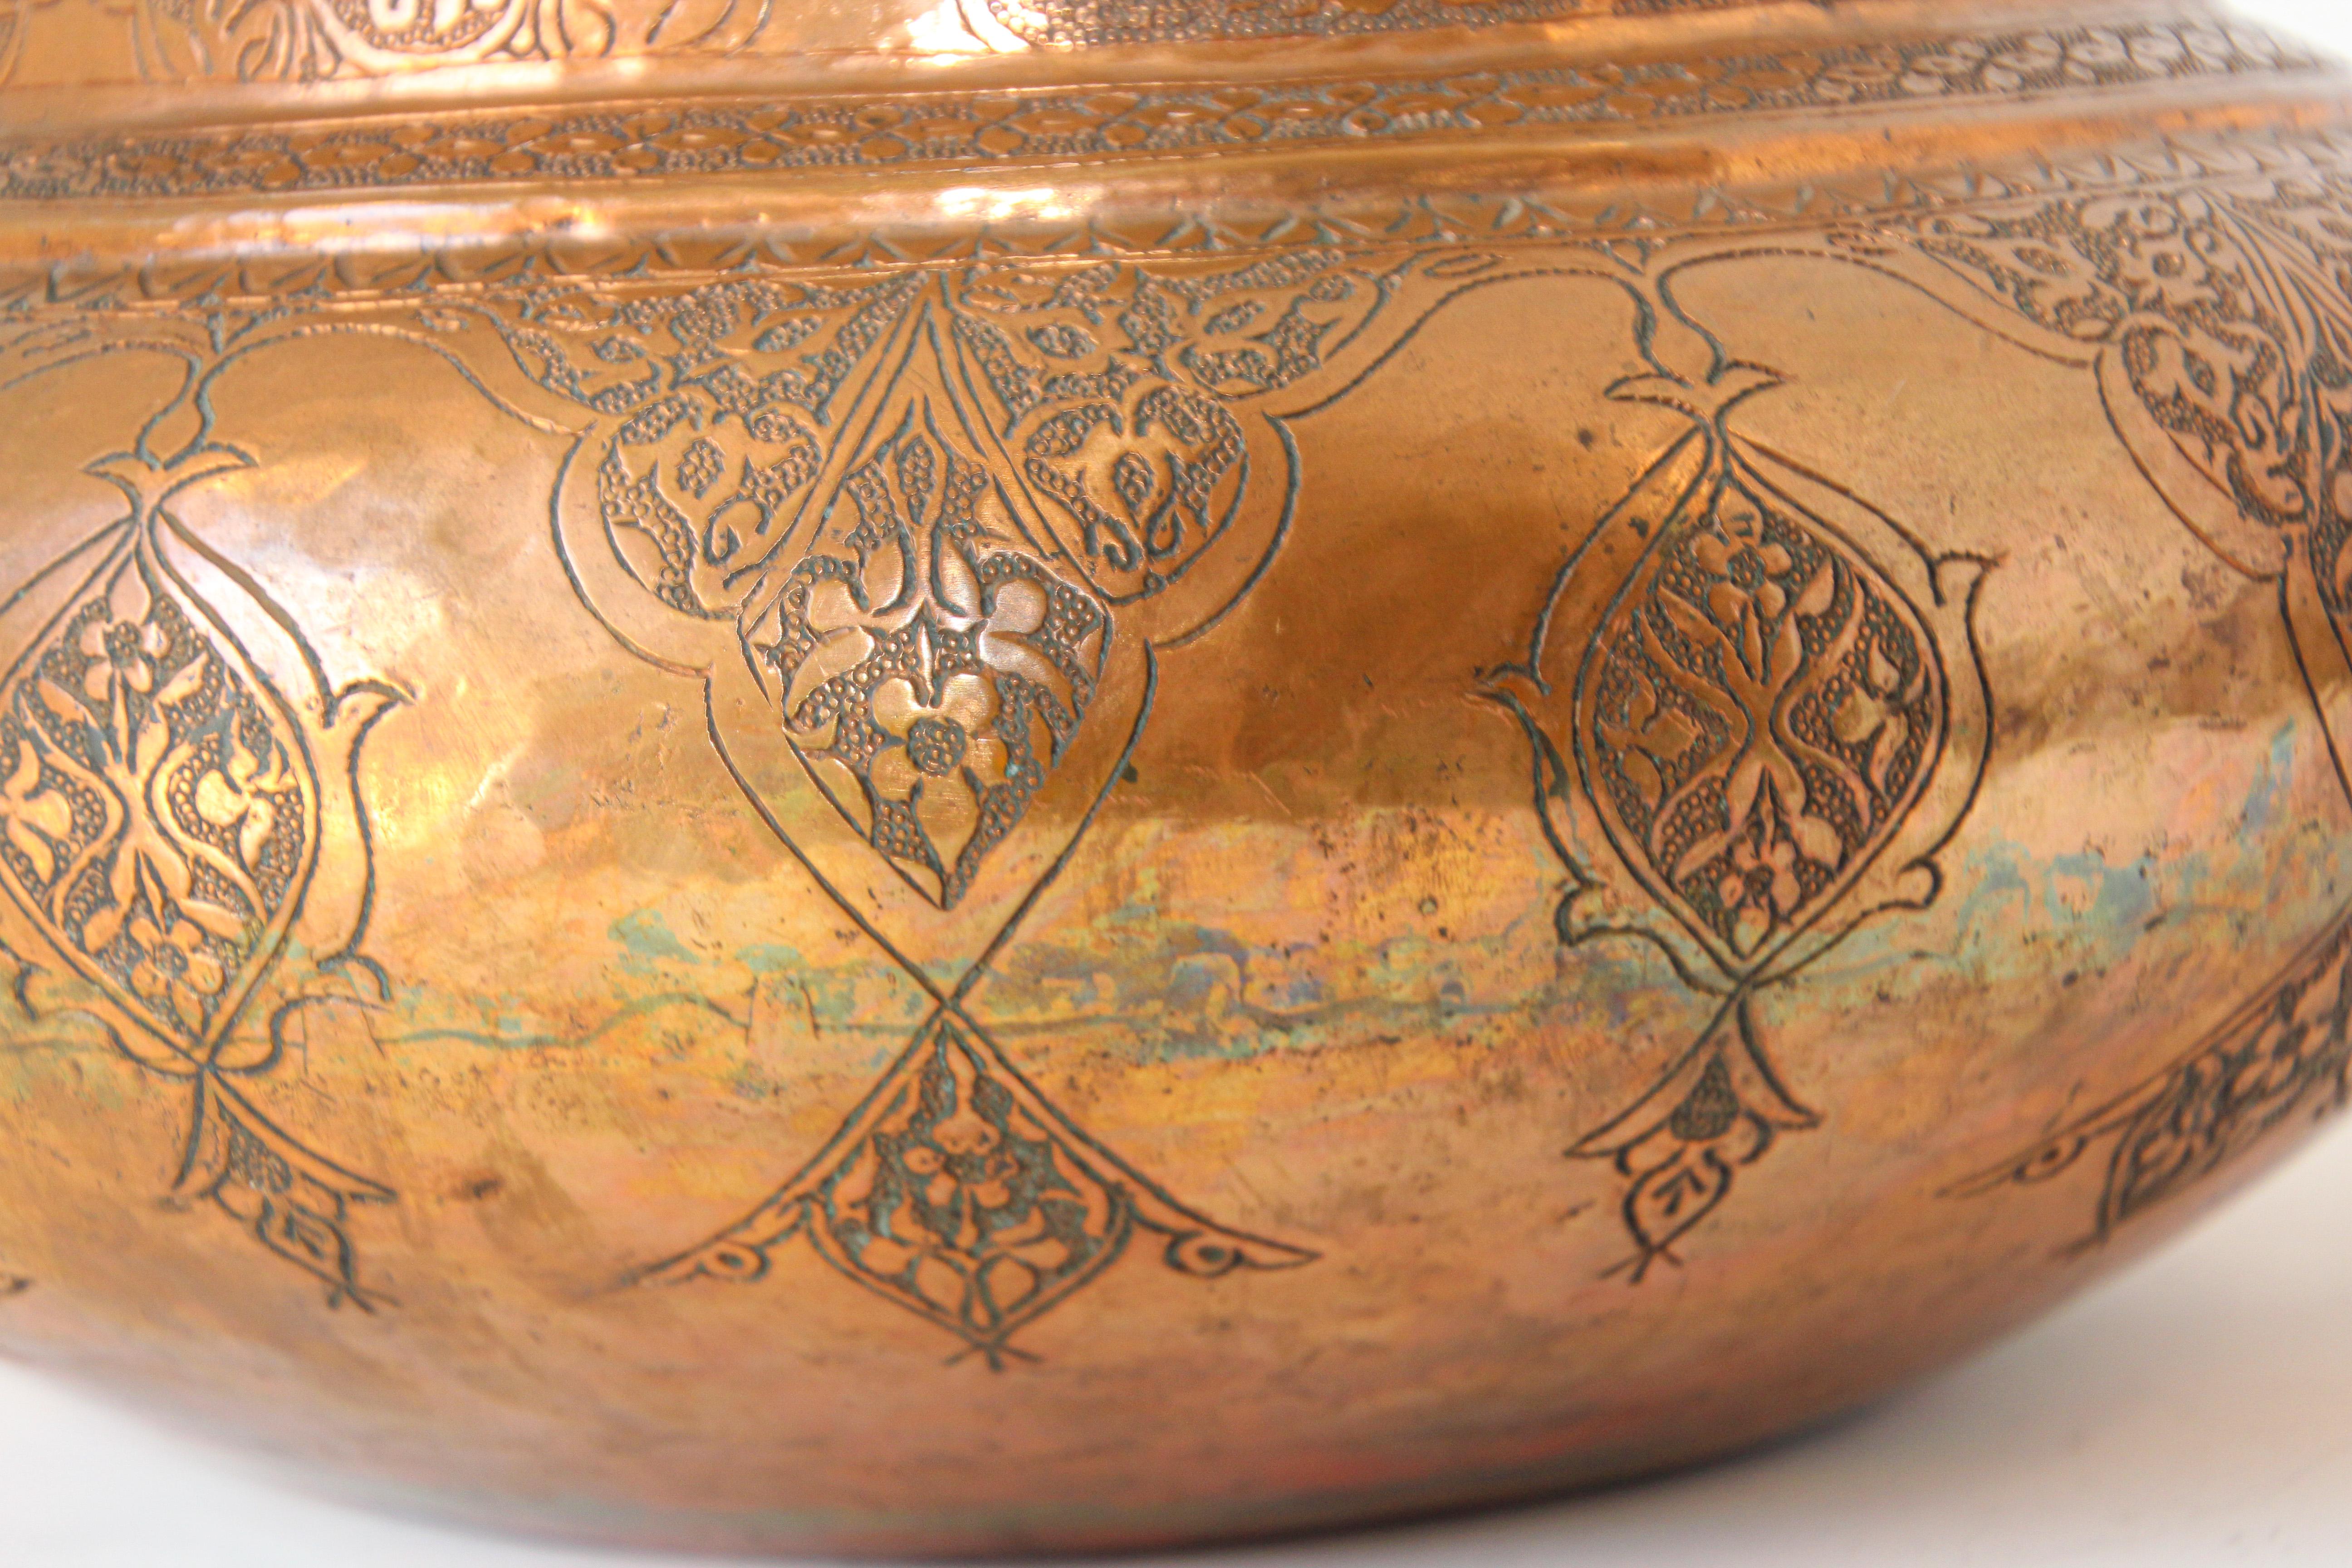 Metal Indo-Persian Tinned Copper Jar With Lid For Sale